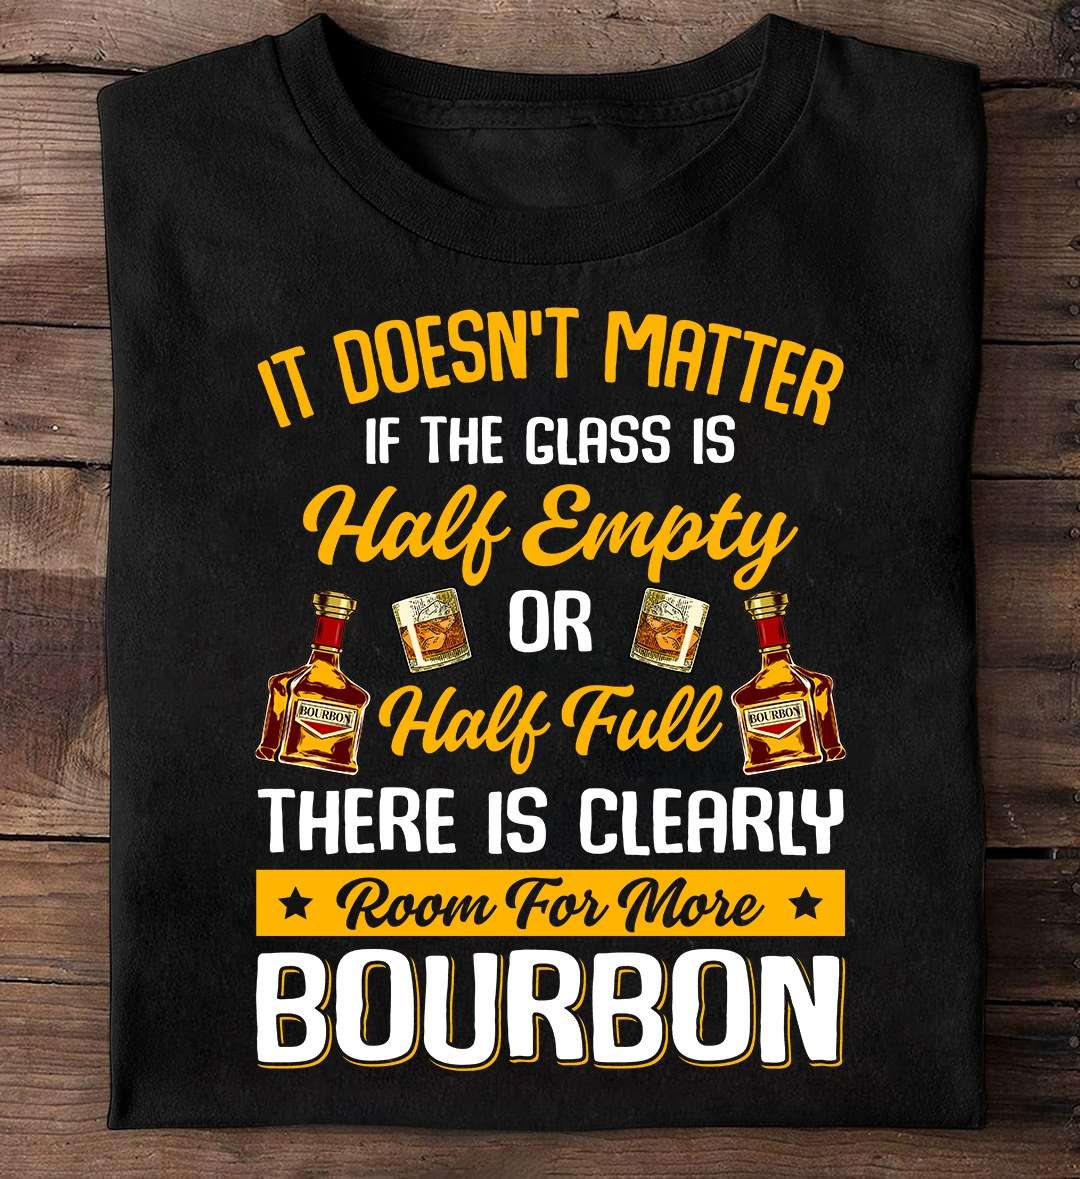 It doesn't matter if the glass is half empty or half full there is clearly room for more bourbon